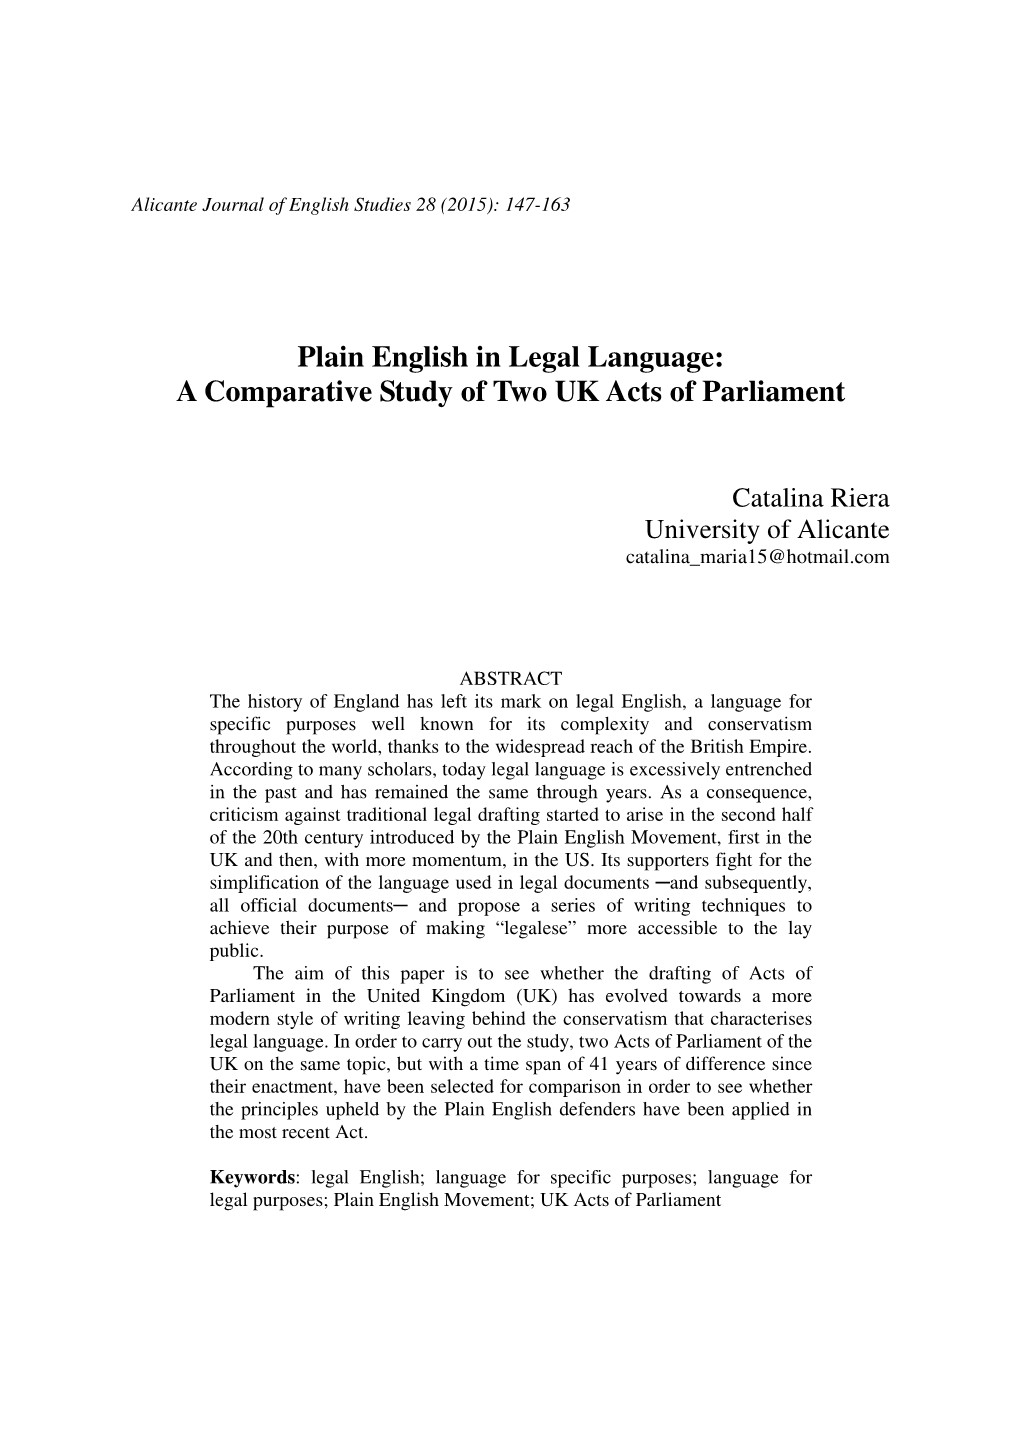 Plain English in Legal Language: a Comparative Study of Two UK Acts of Parliament